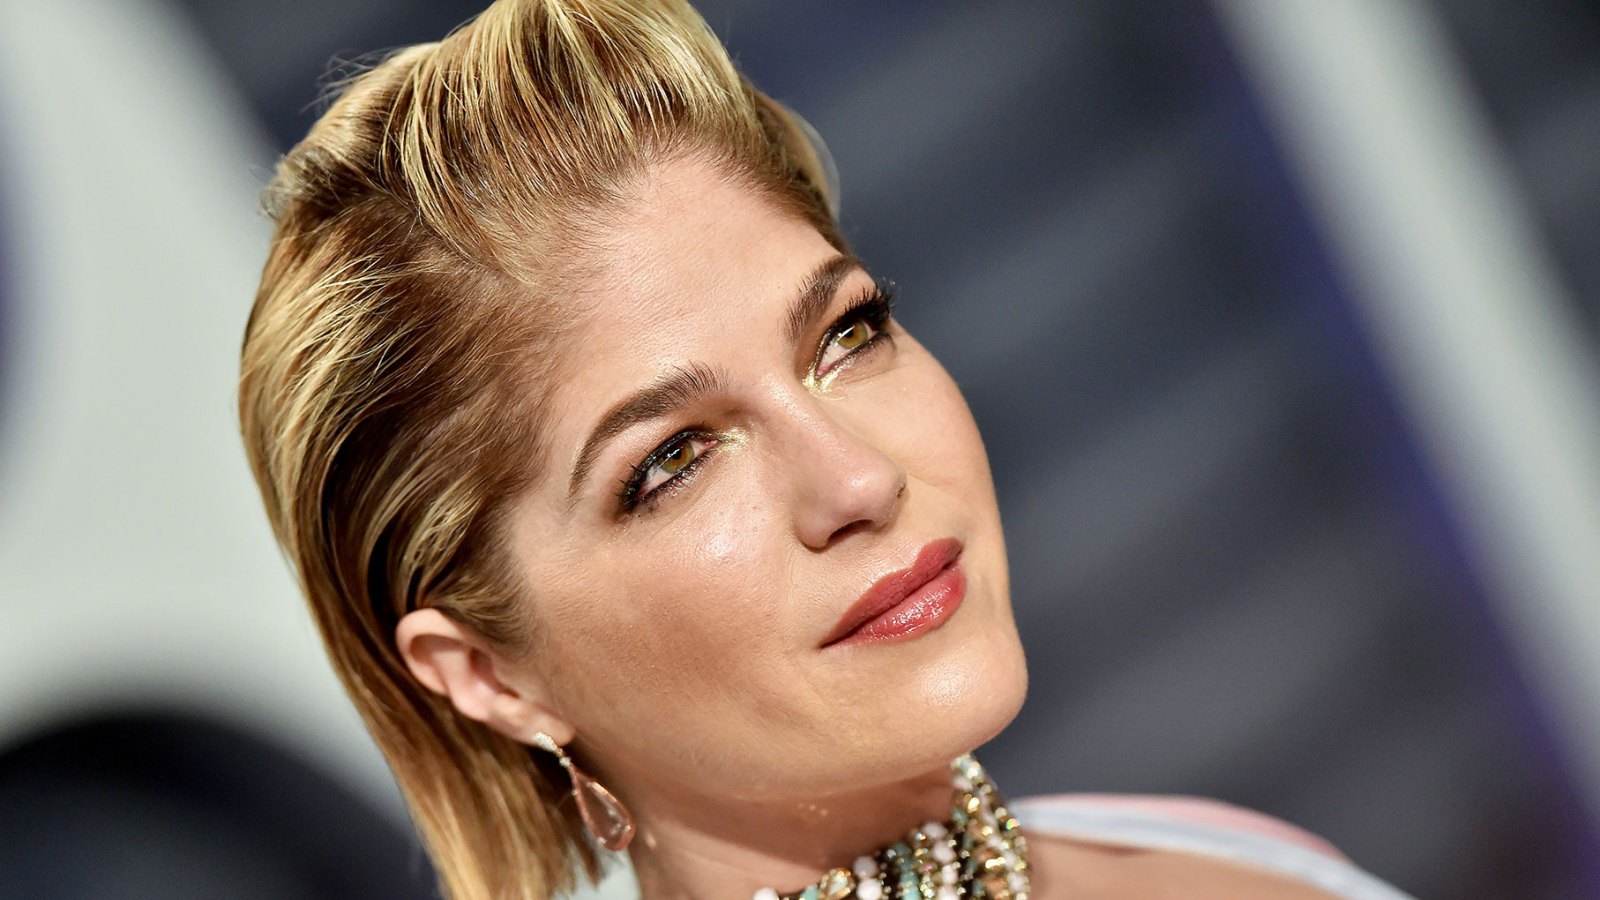 Selma Blair Shares Humorous and Heartwarming Makeup Tutorial for People with MS